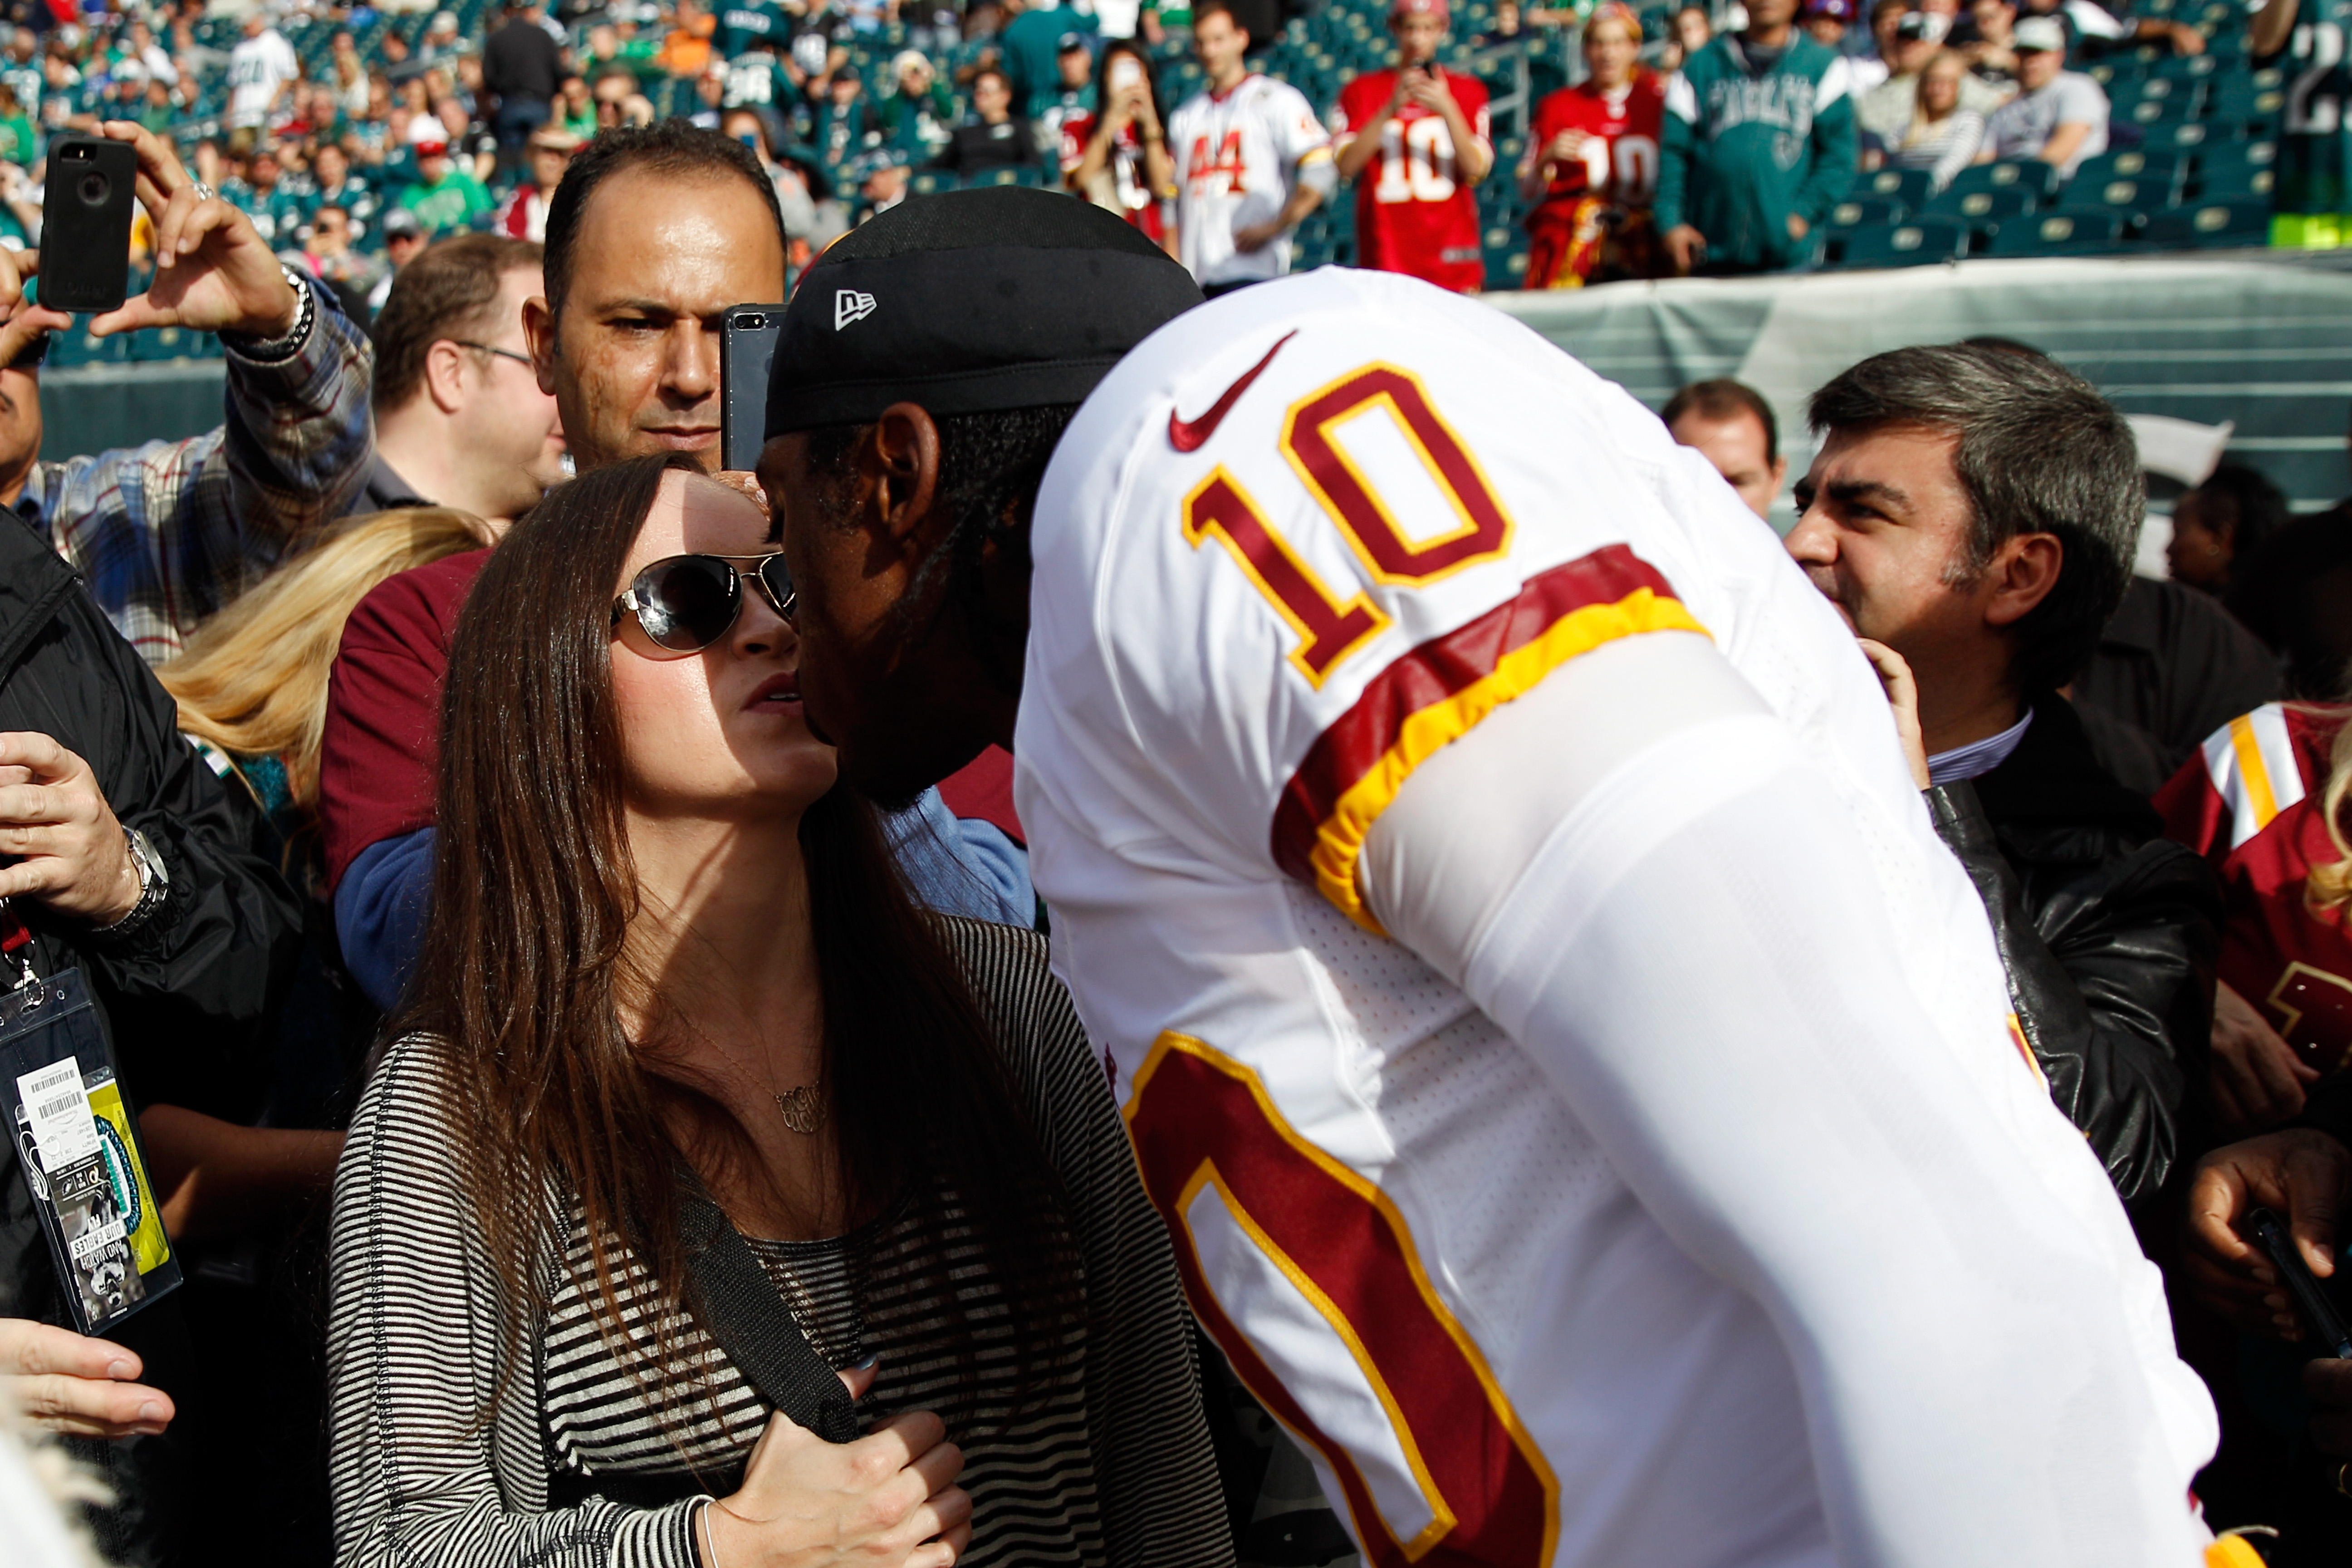 Robert Griffin III and Rebecca Liddicoat sharing a kiss before the start of the Redskins game against the Philadelphia Eagles on November 17, 2013 in Philadelphia, Pennsylvania. | Source: Getty Images